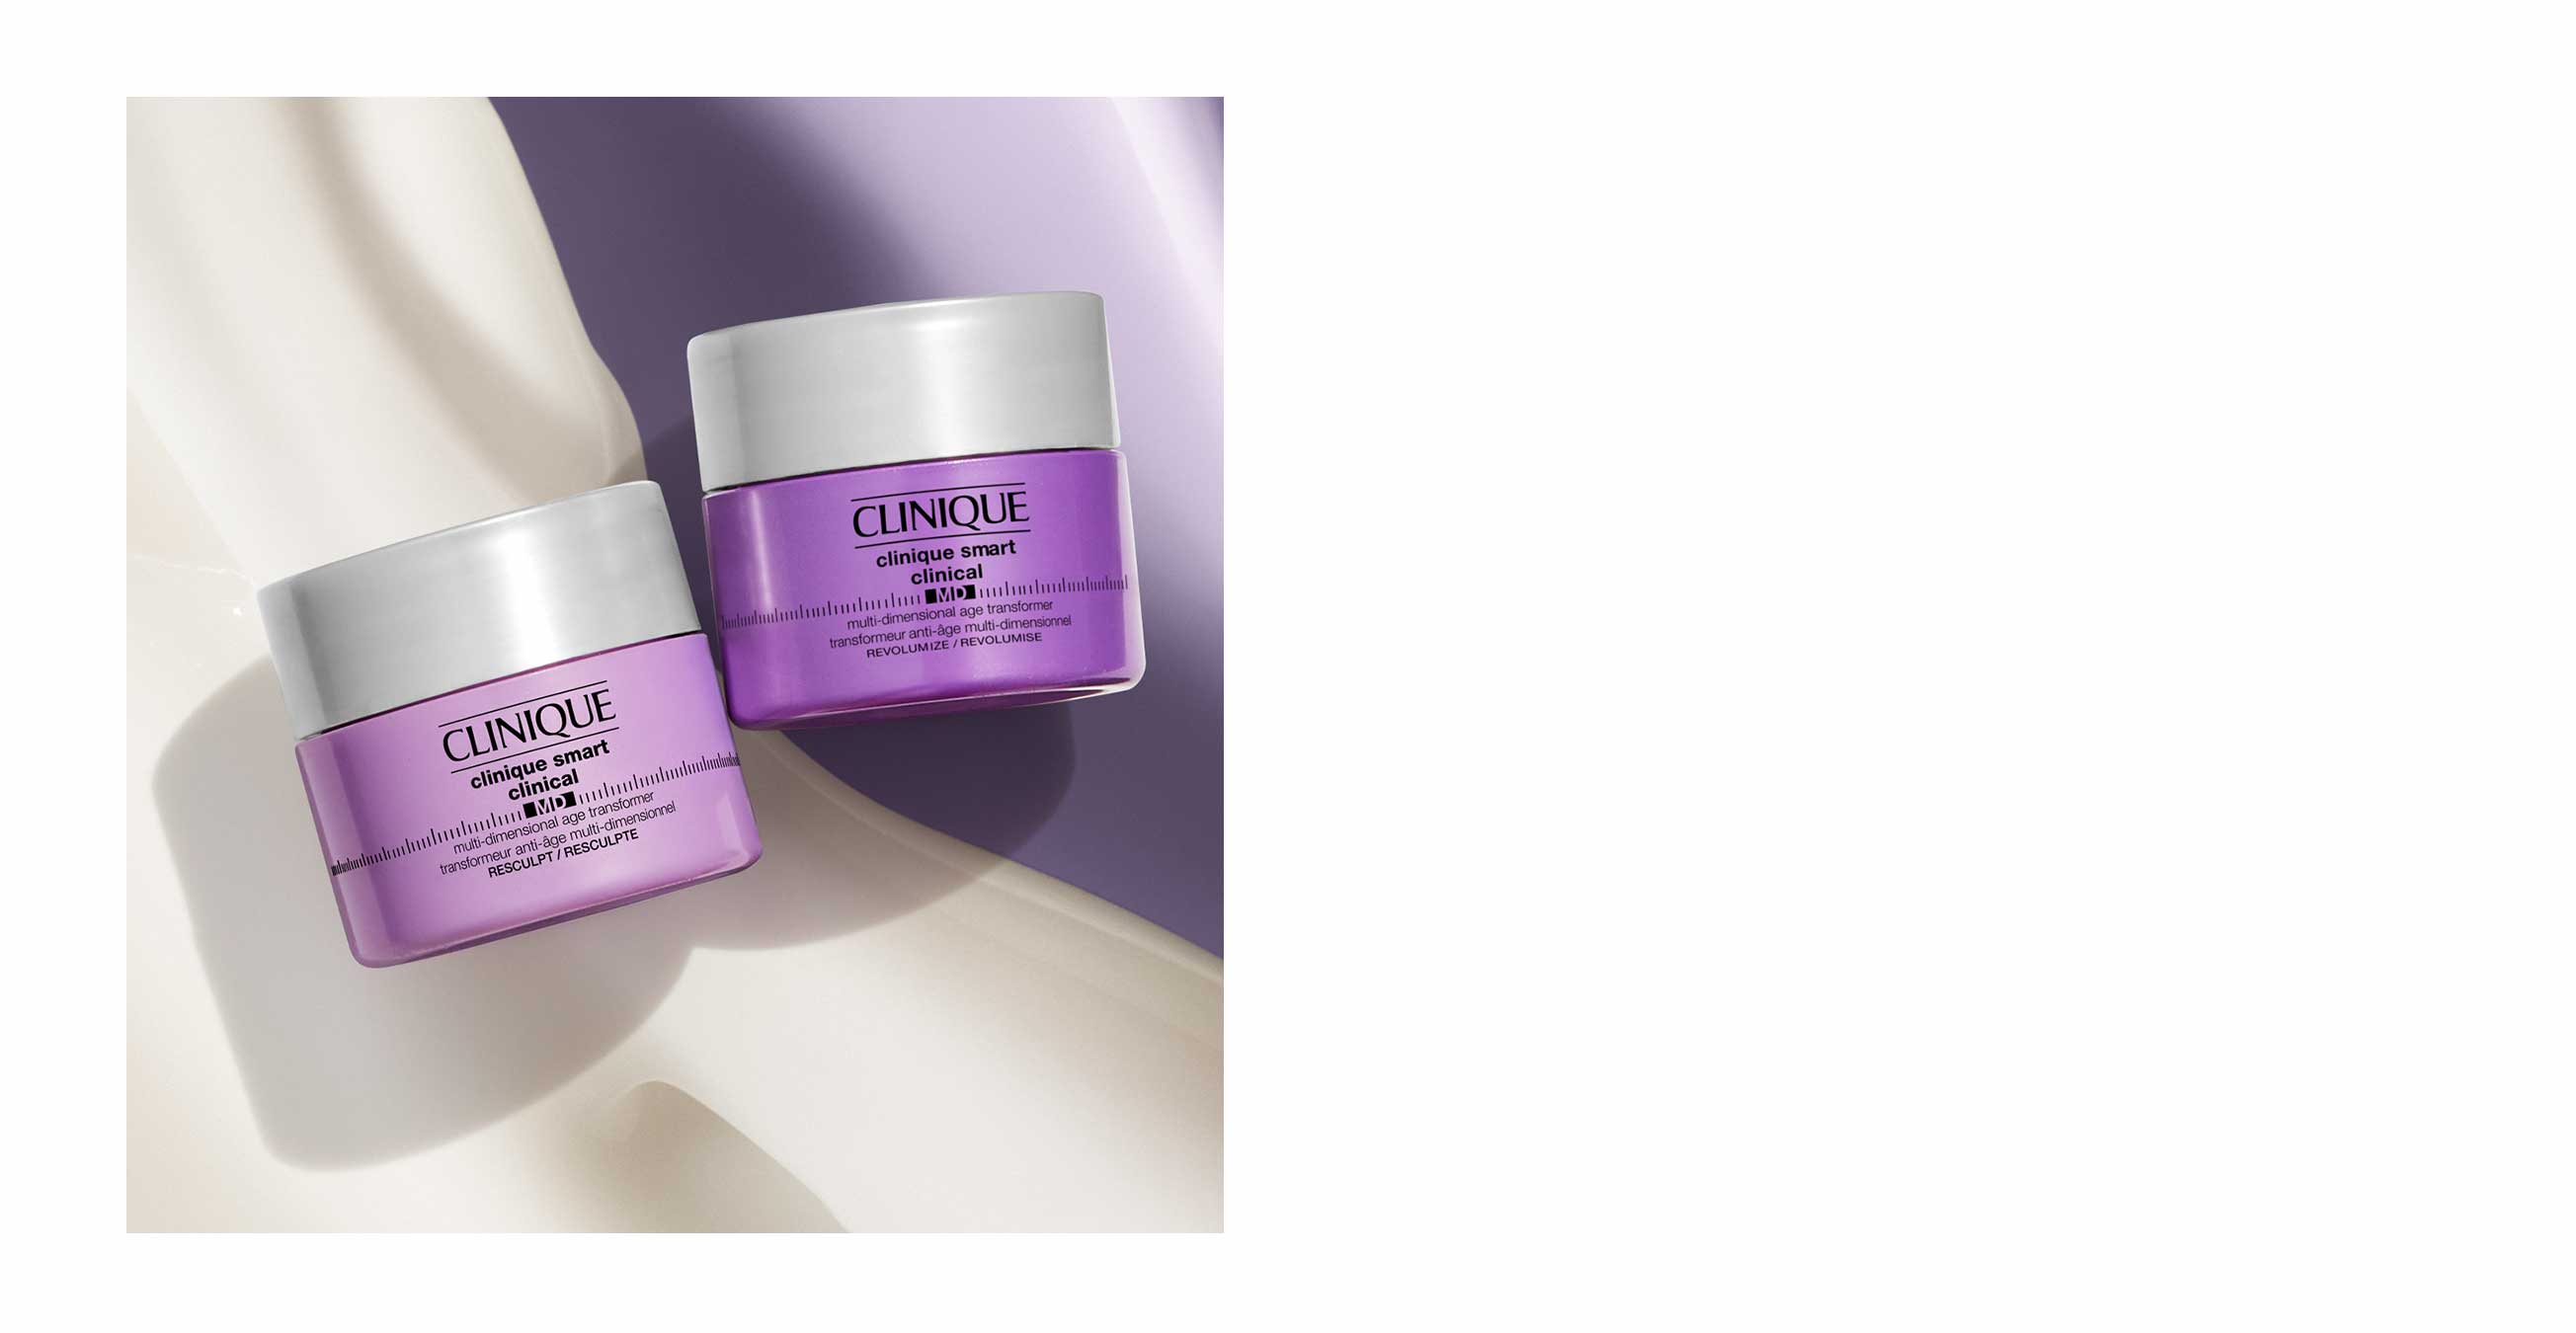 Plump & Firm Duo. Yours free. With any $65 purchase.*